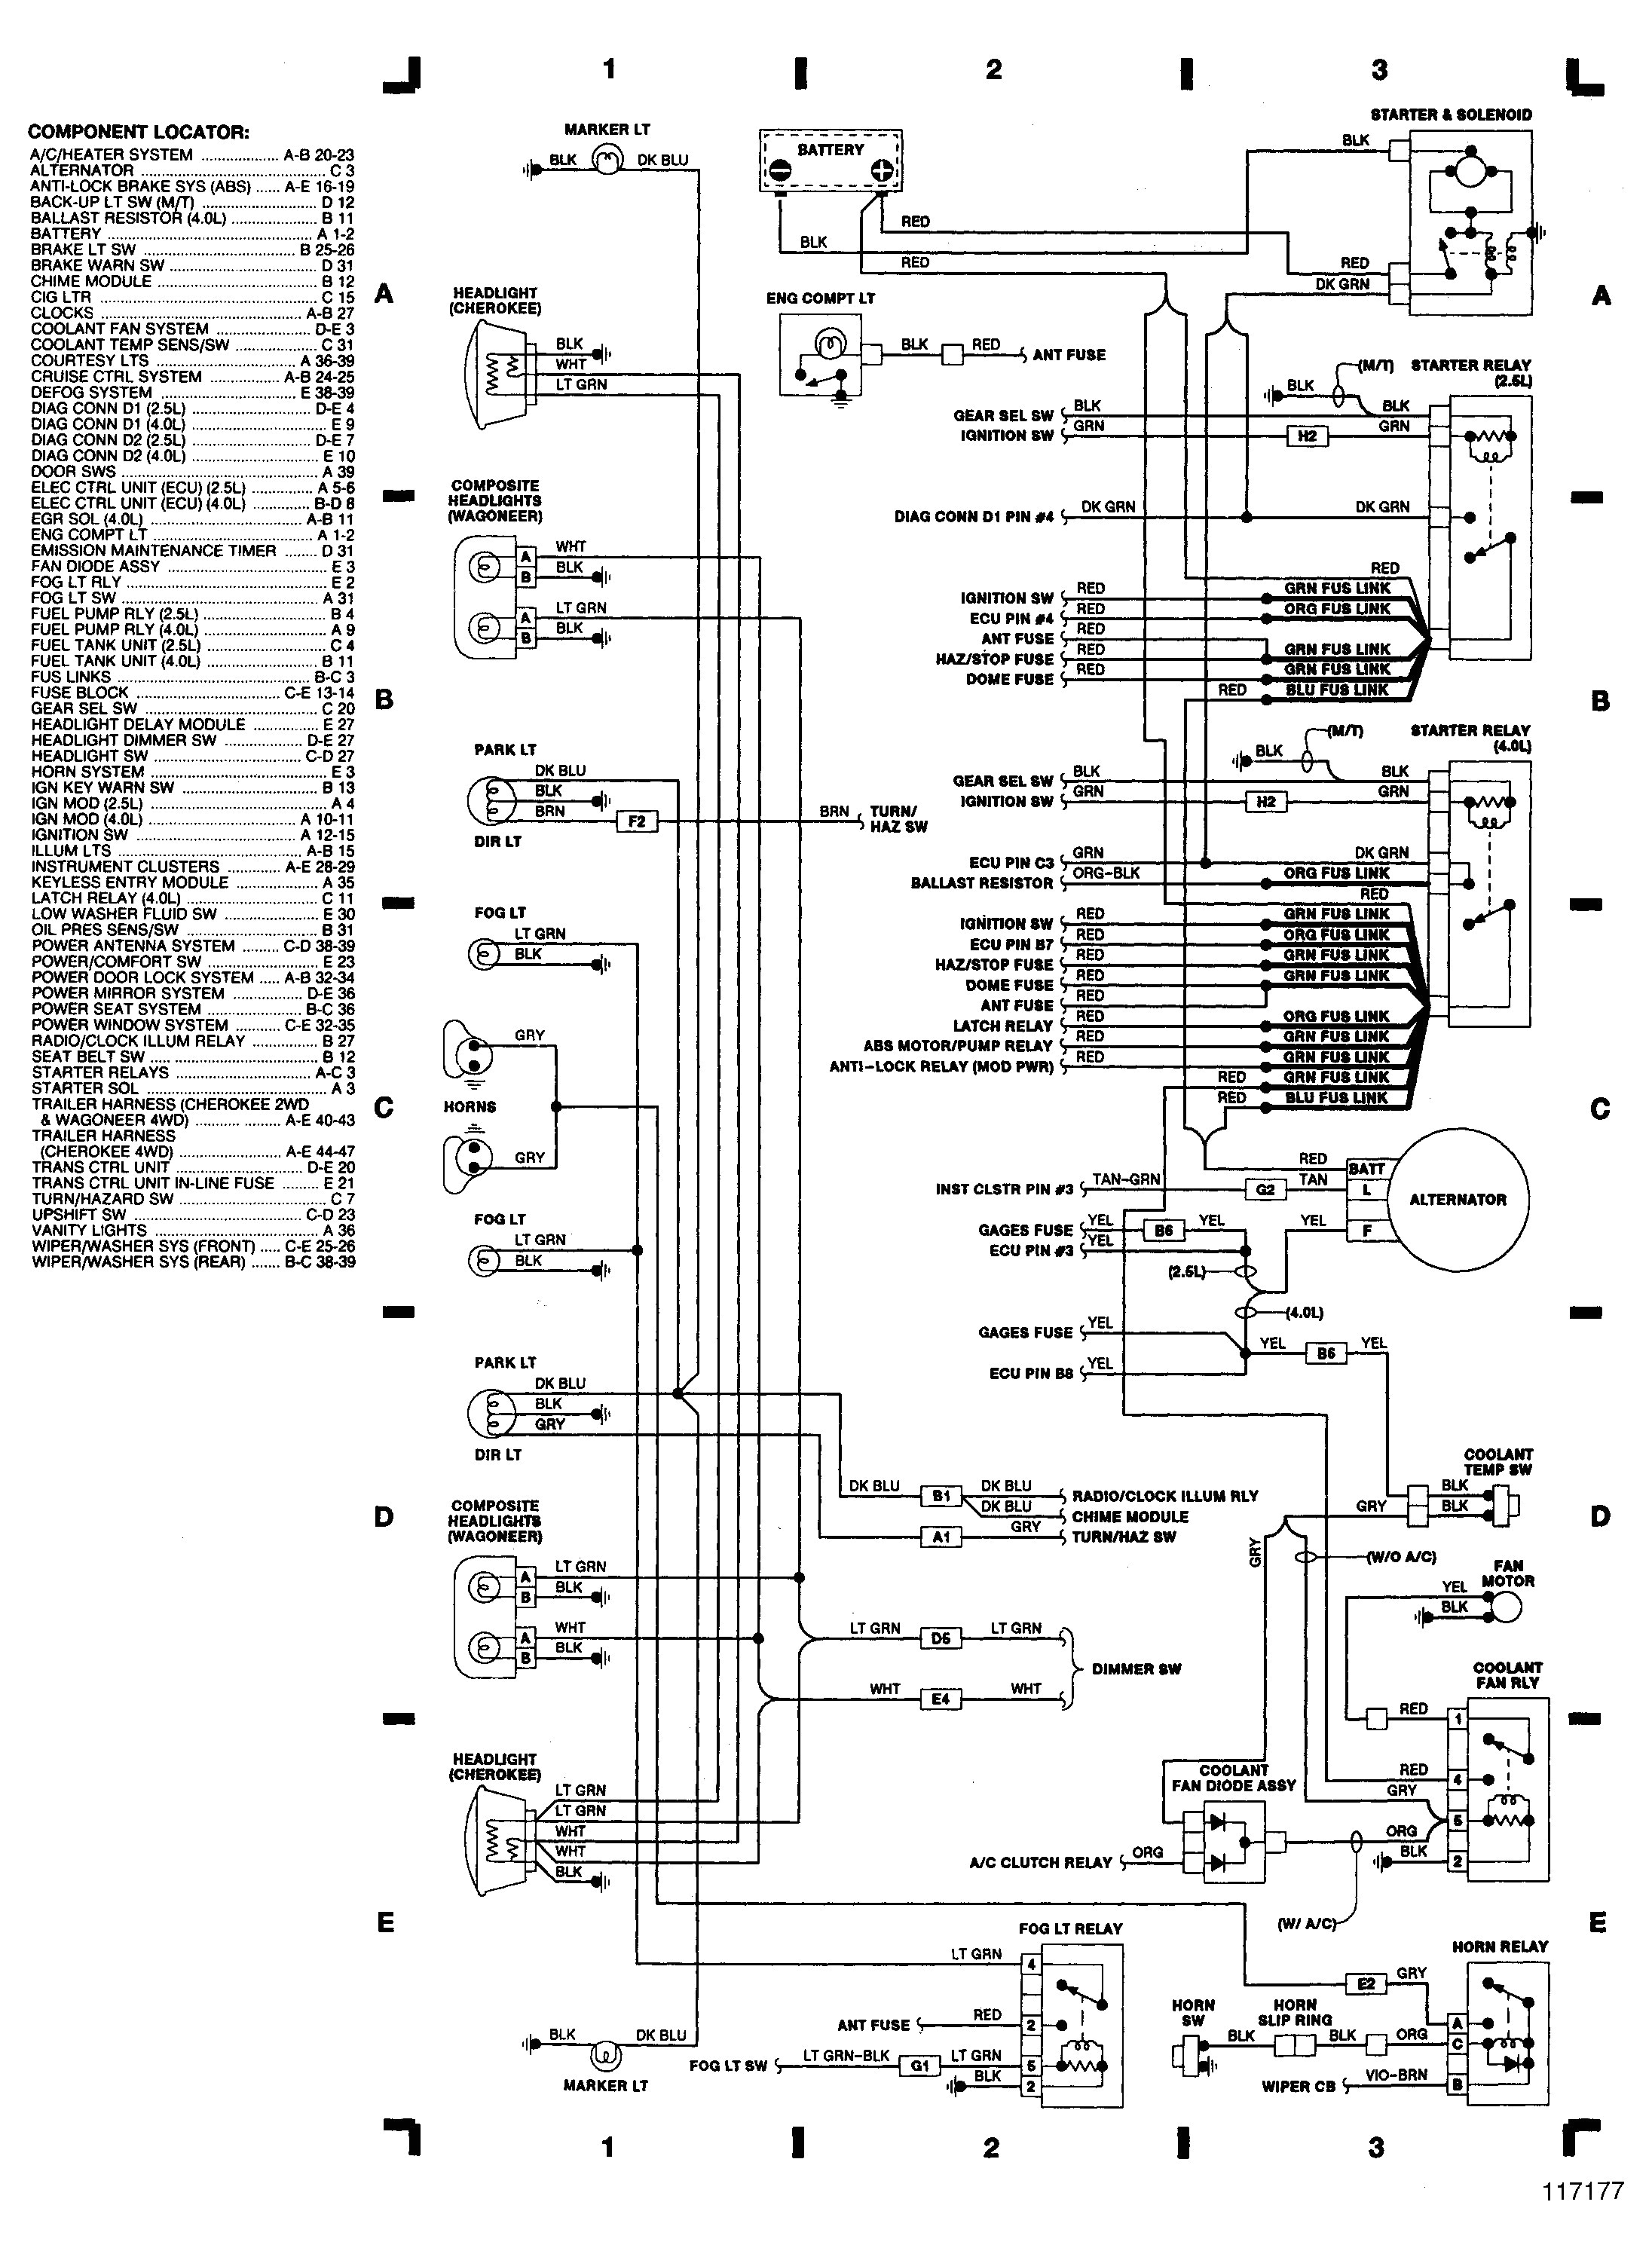 1998 jeep grand cherokee wiring harness wiring diagram inside 1997 jeep grand cherokee trailer wiring harness free download wiring